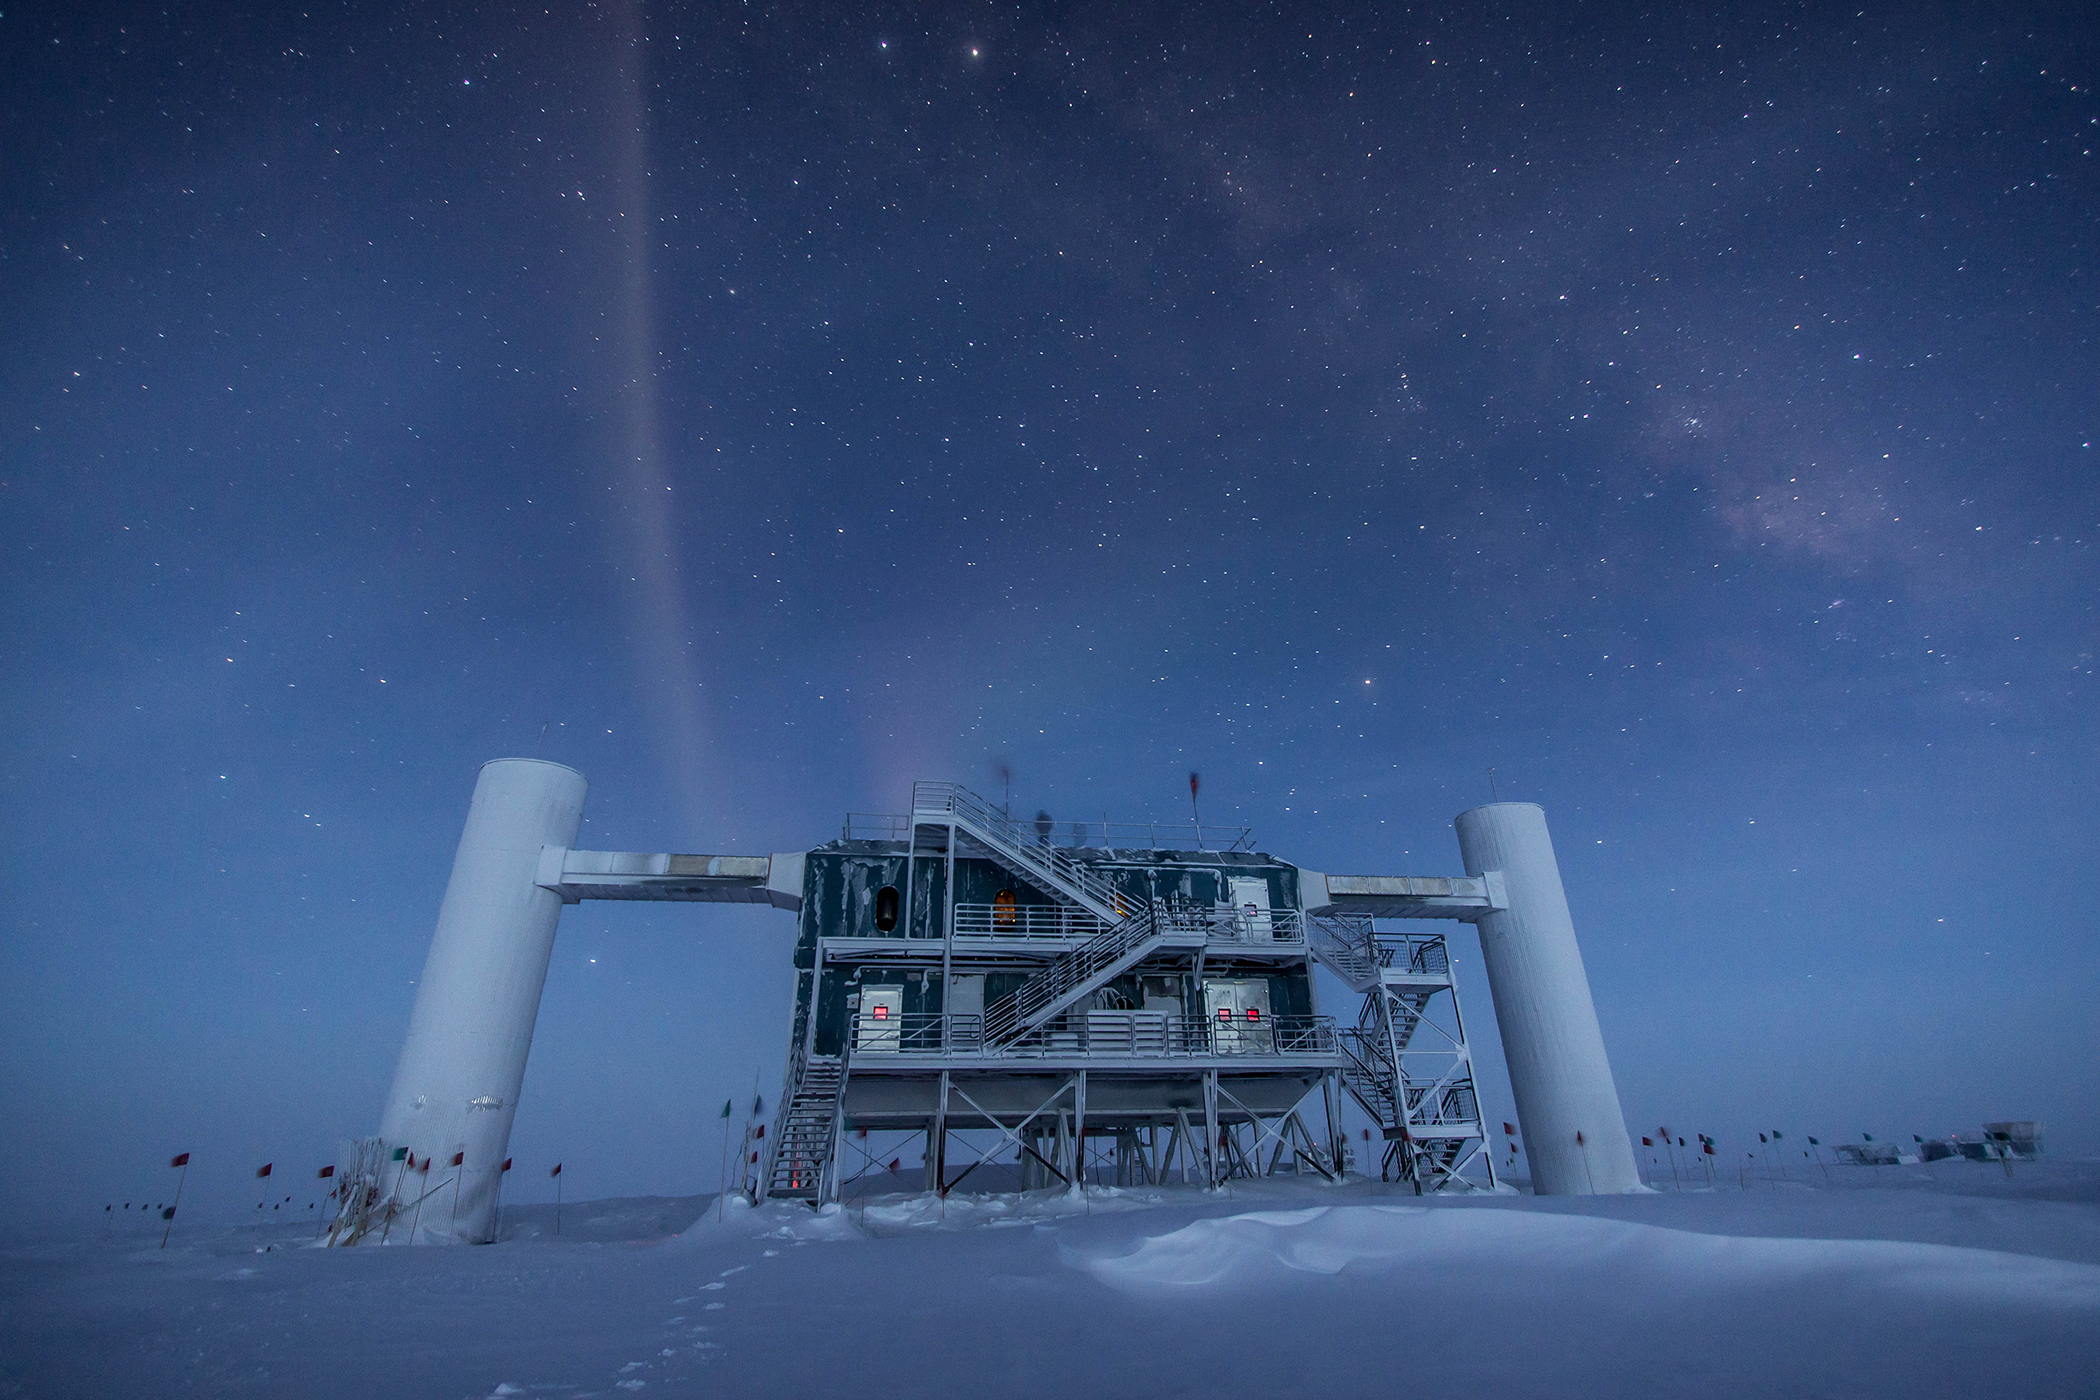 A towering research station stands under a star-studded sky in Antarctica.